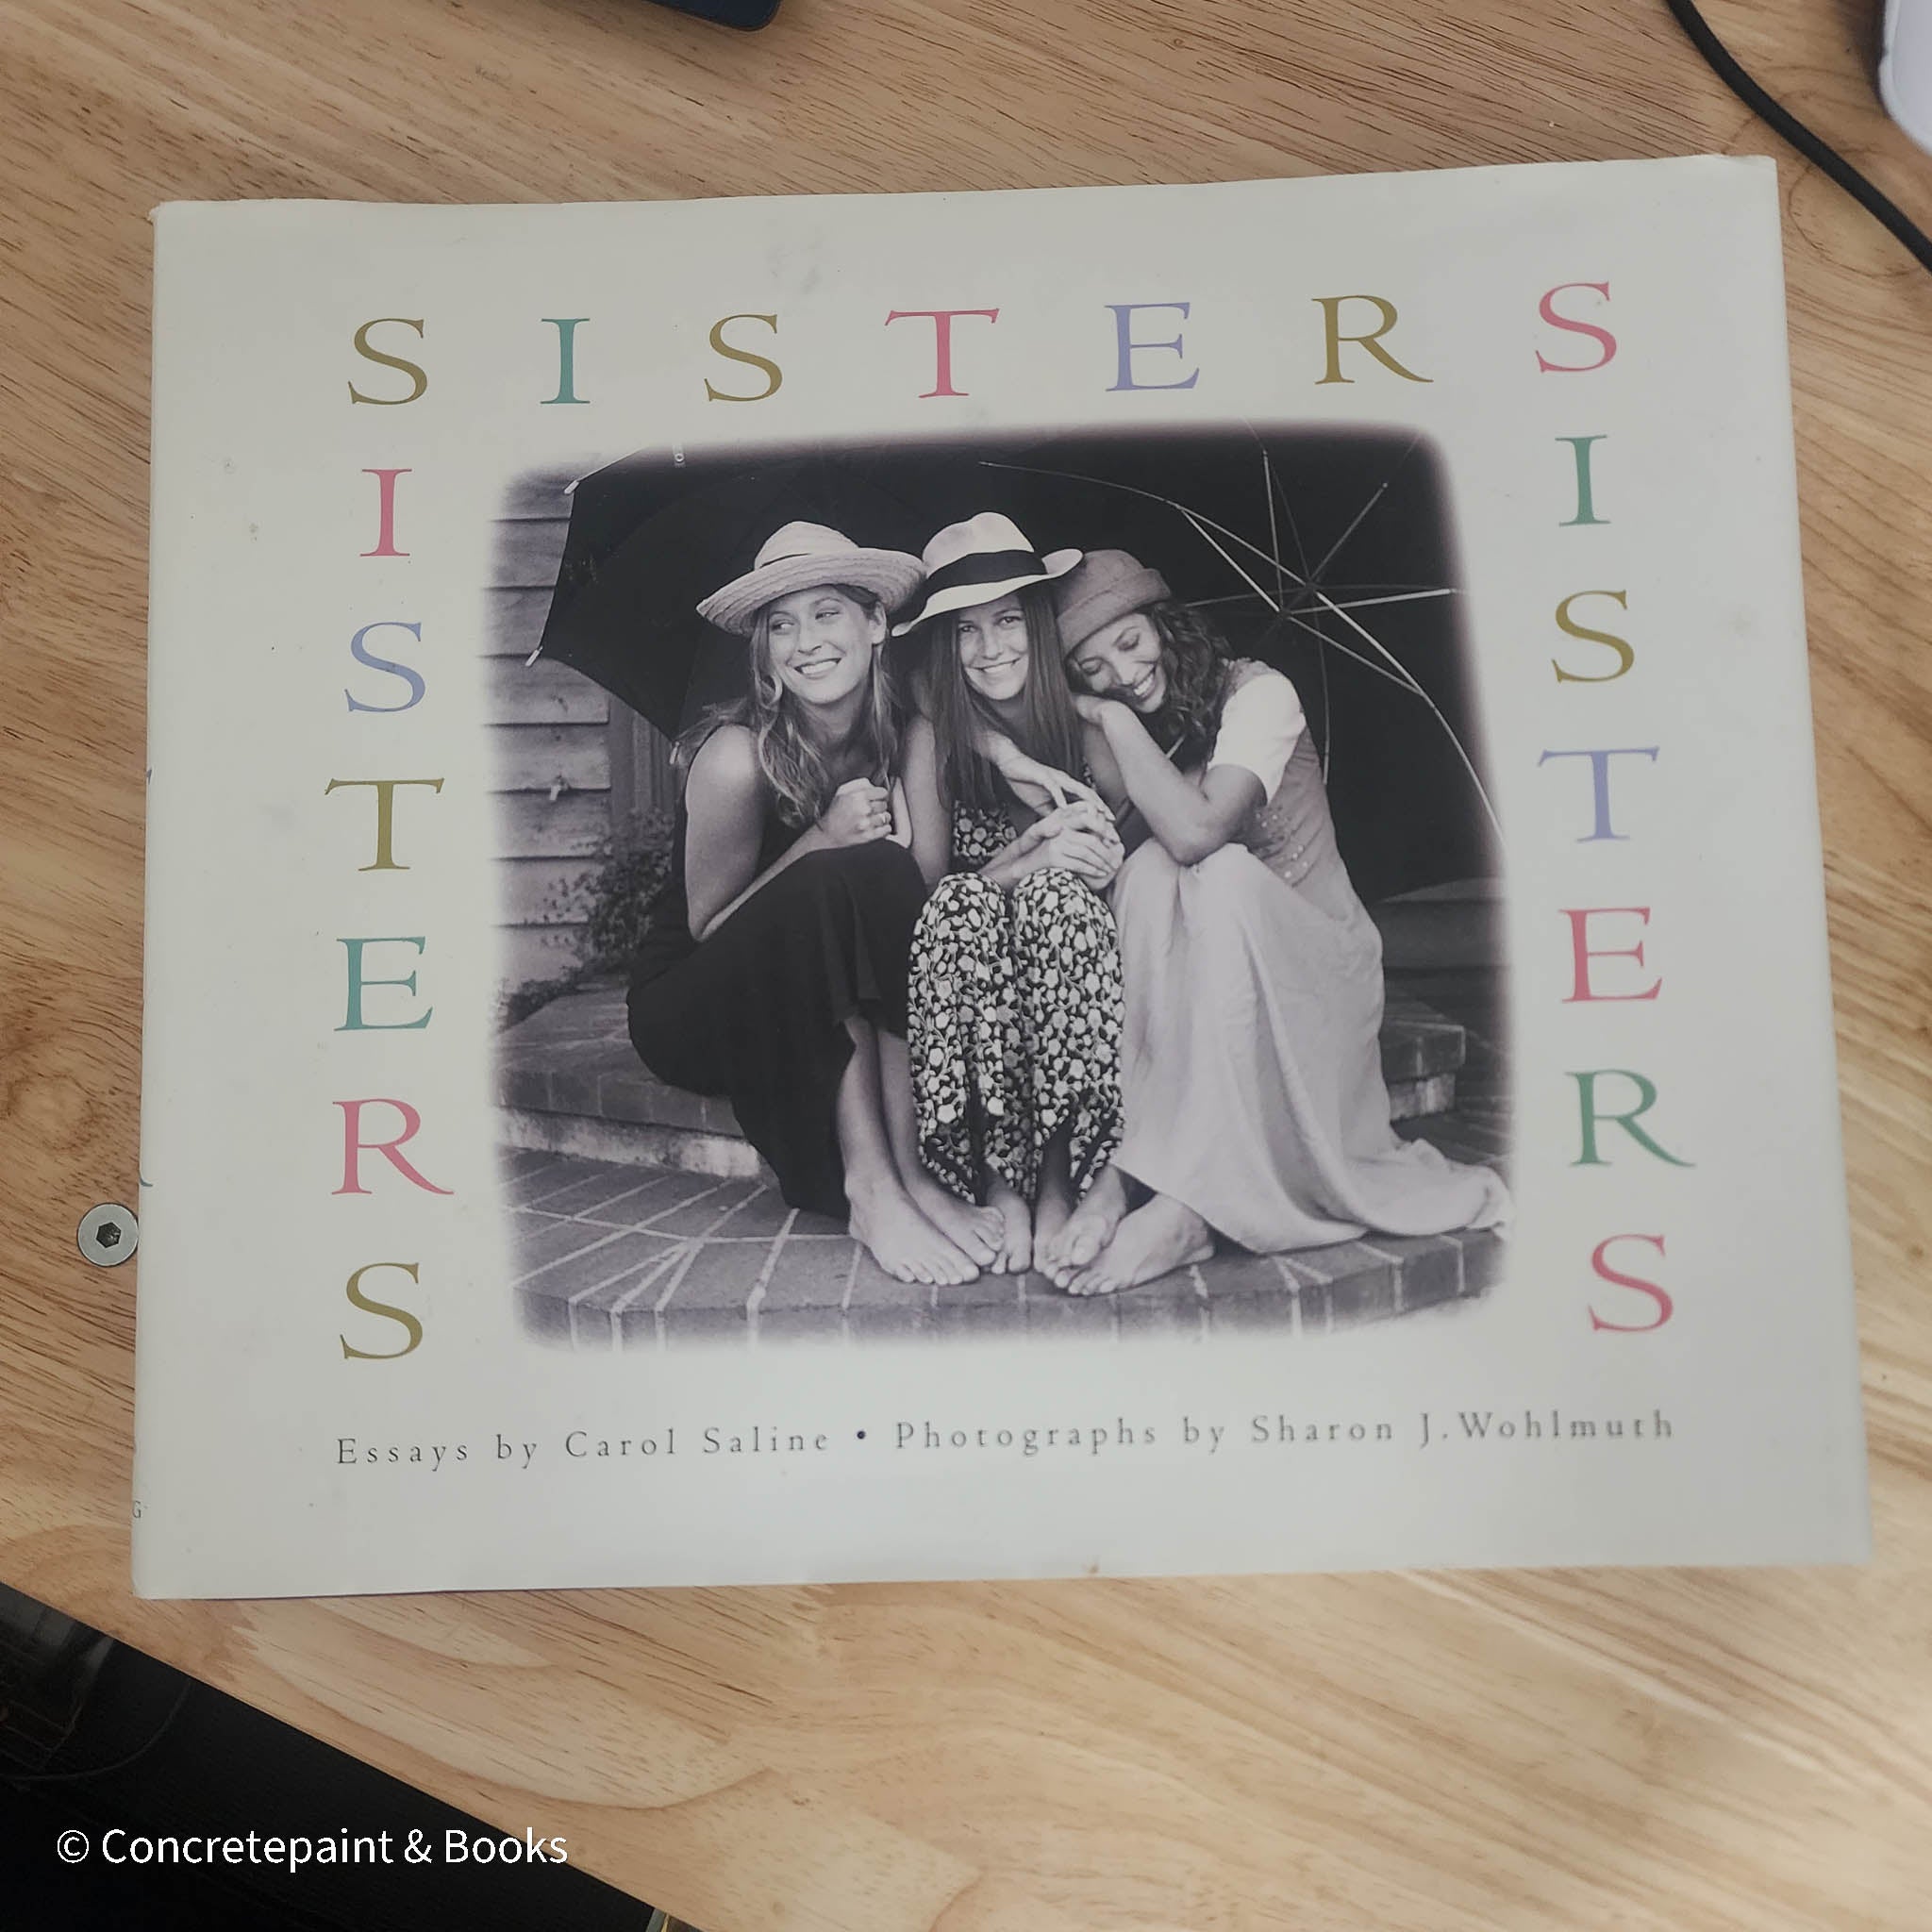 Mother, Sister & Friend Book Stack 4